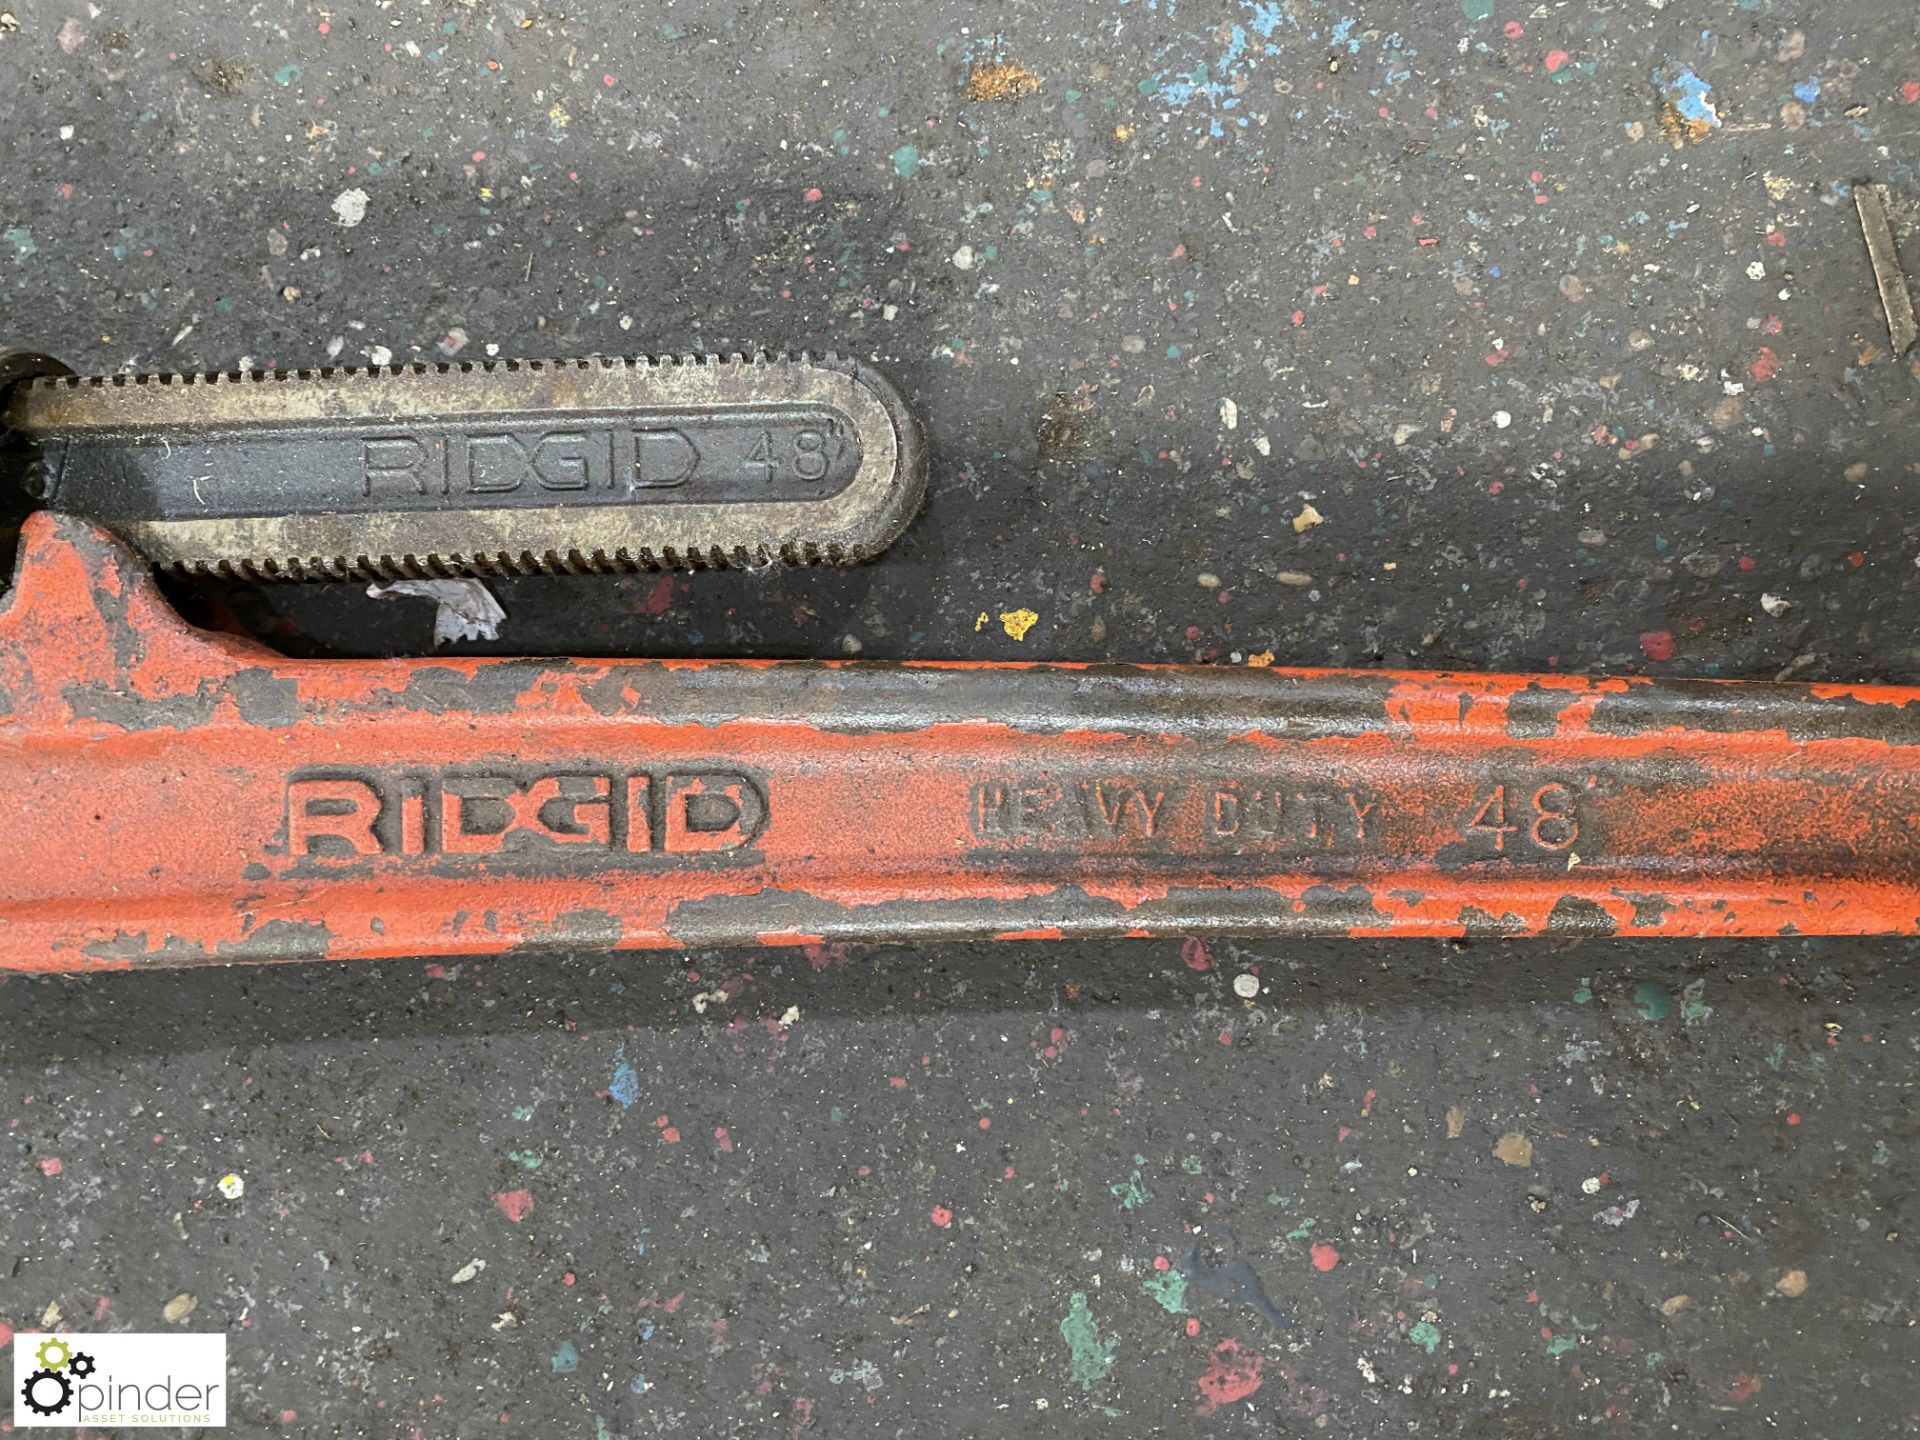 Ridgid heavy duty Pipe Wrench, 48in - Image 2 of 3